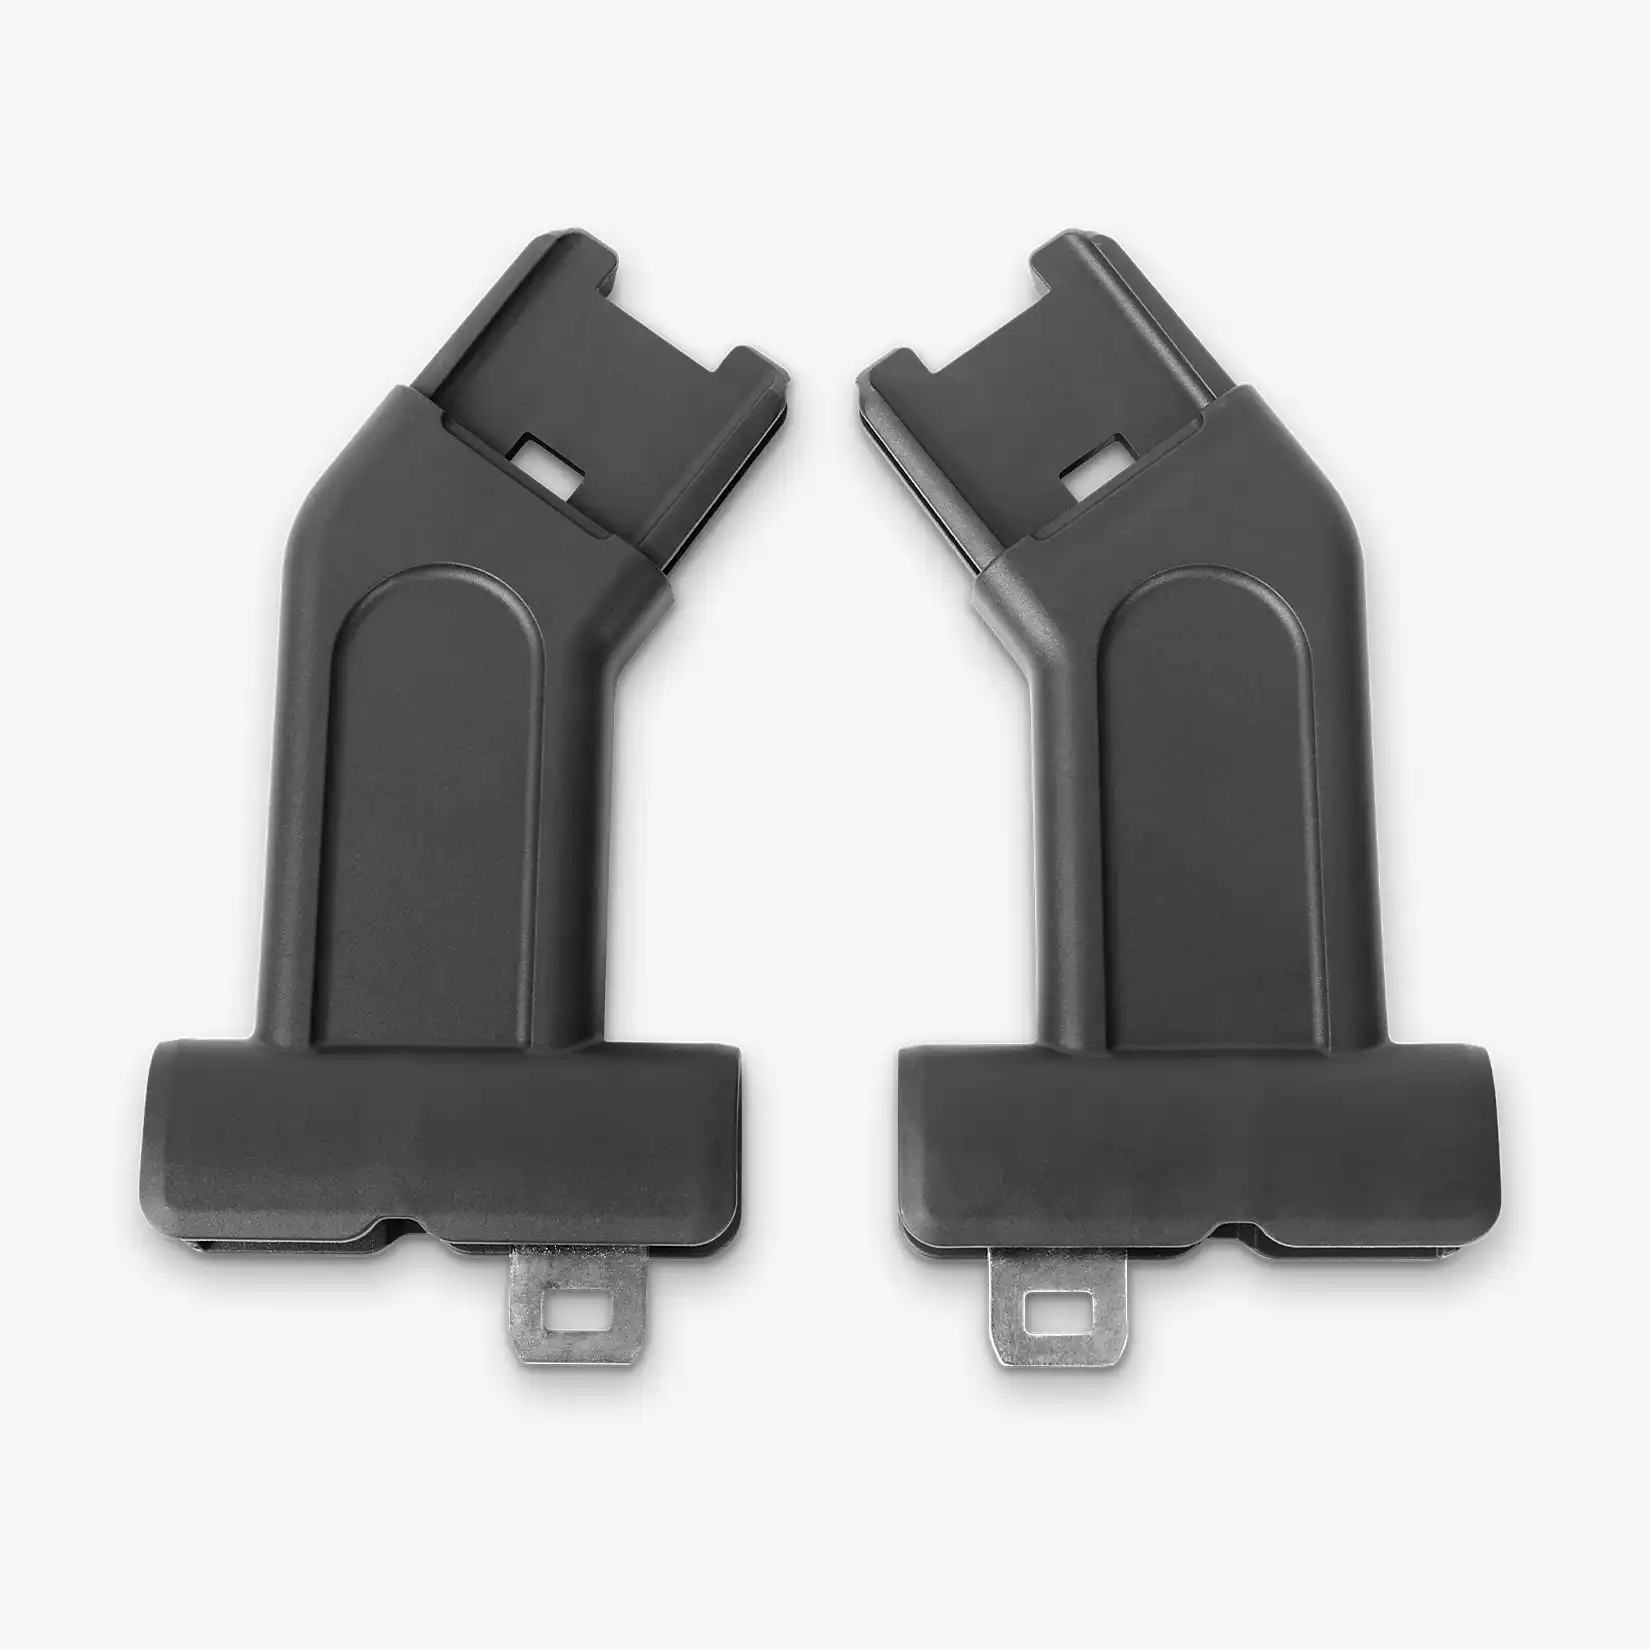 Adapters (Mesa i-Size and Carrycot)